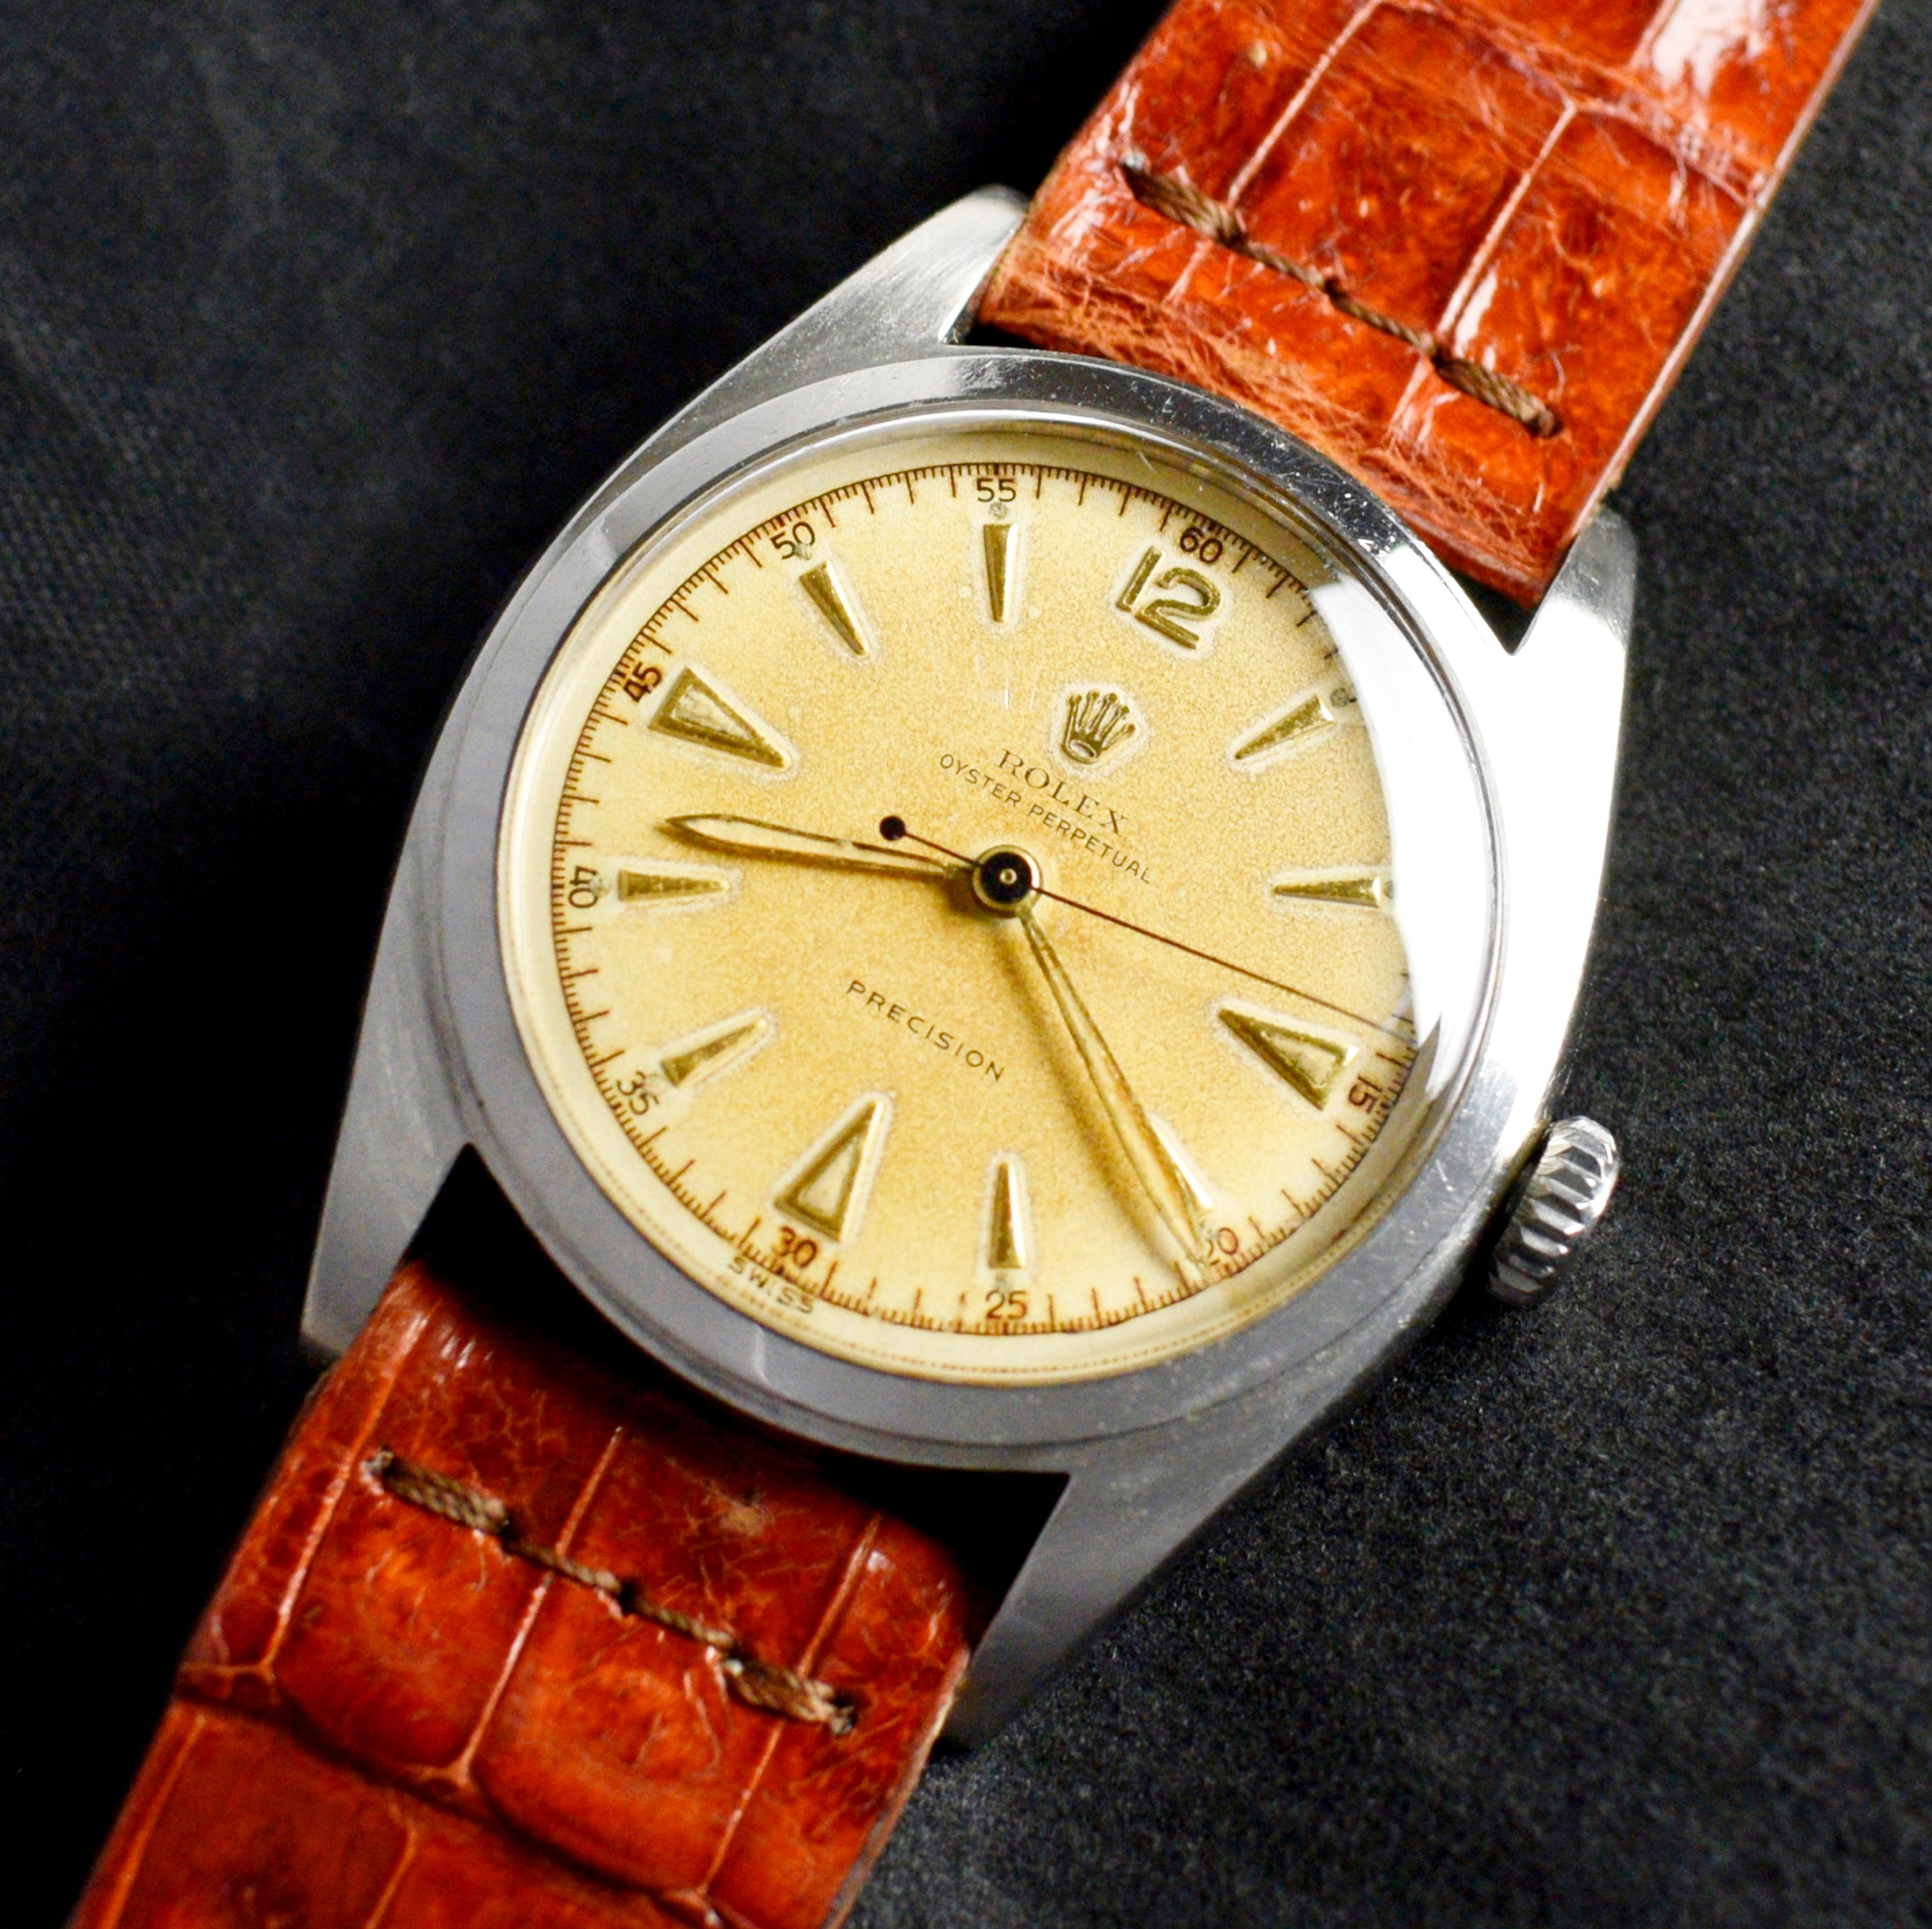 Brand: Vintage Rolex
Model: 6098
Year: 1952
Serial number: 72xxxx
Reference: OT1579

Case: 36mm diameter without crown; show sign of wear with slight polish from previous; inner case back stamped 6098

Dial: Aged Condition Creamy Dial with black